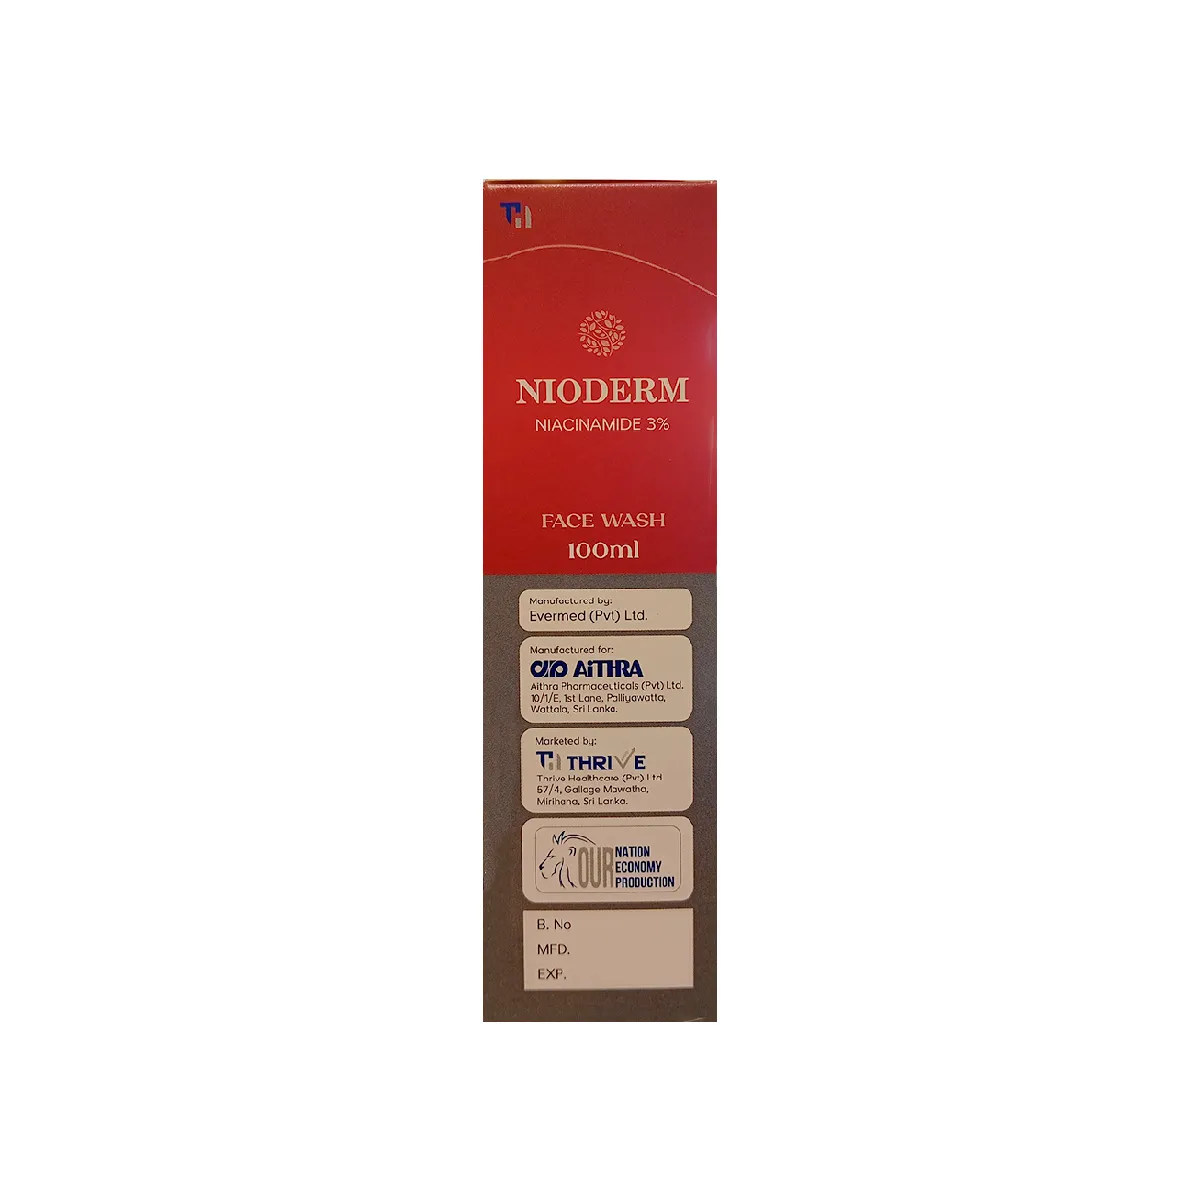 First product image of Nioderm Face Wash 100ml